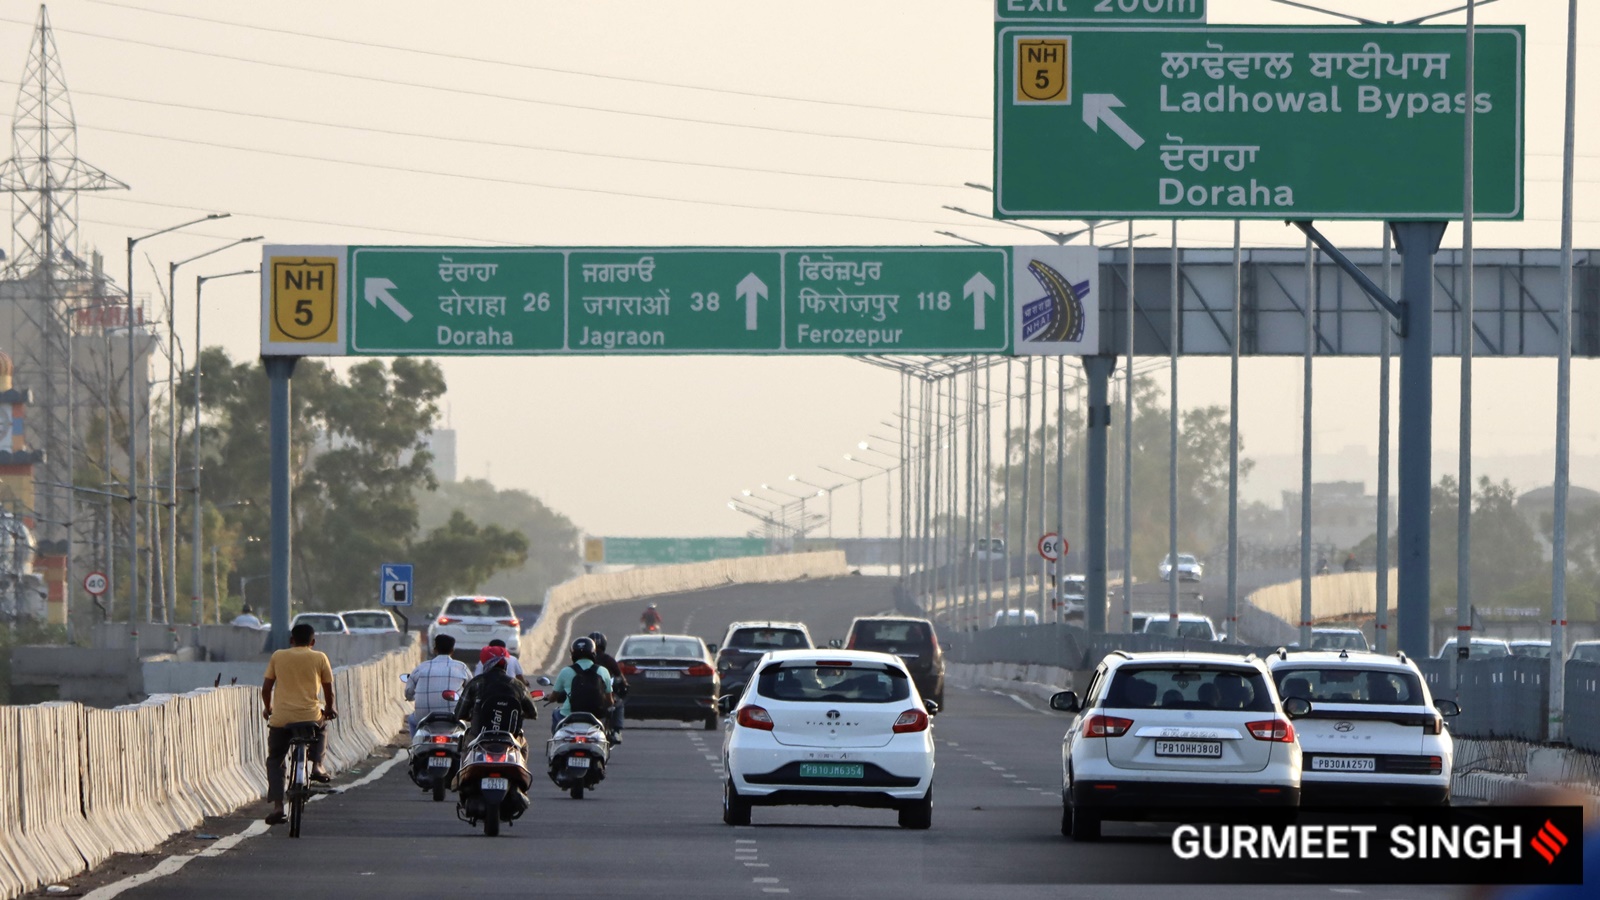 The highway has changed Ludhiana’s landscape 